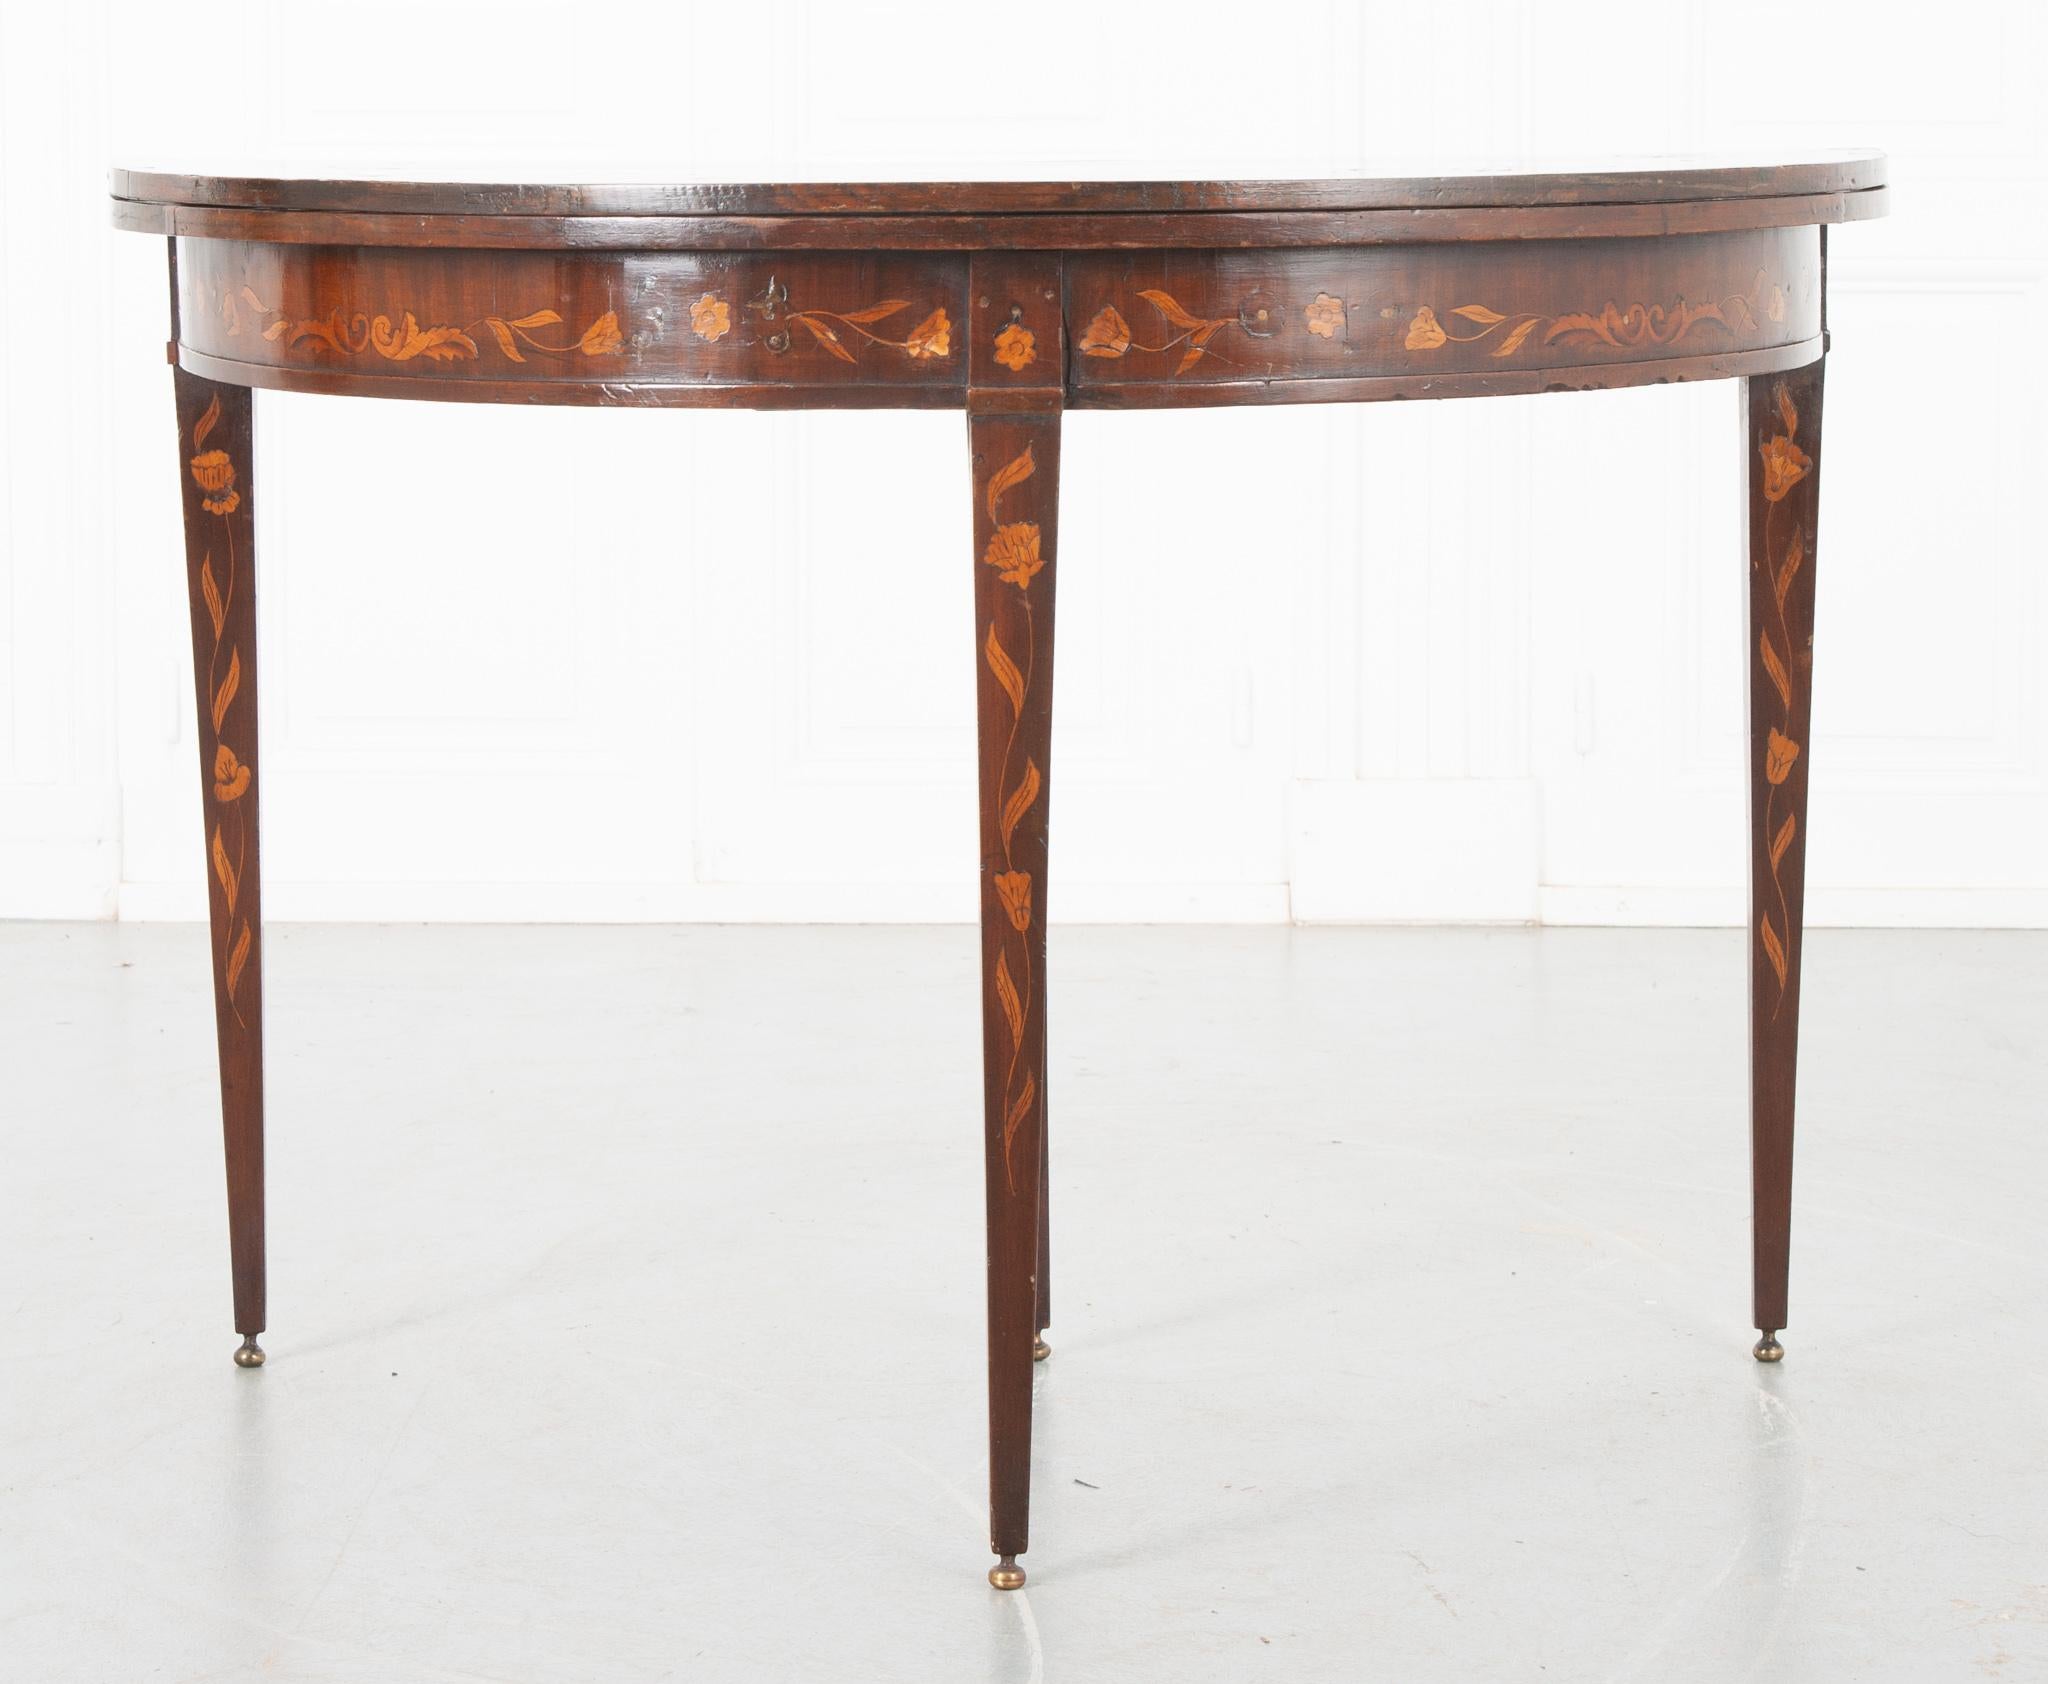 Late 18th Century Dutch Marquetry Game Table In Good Condition For Sale In Baton Rouge, LA